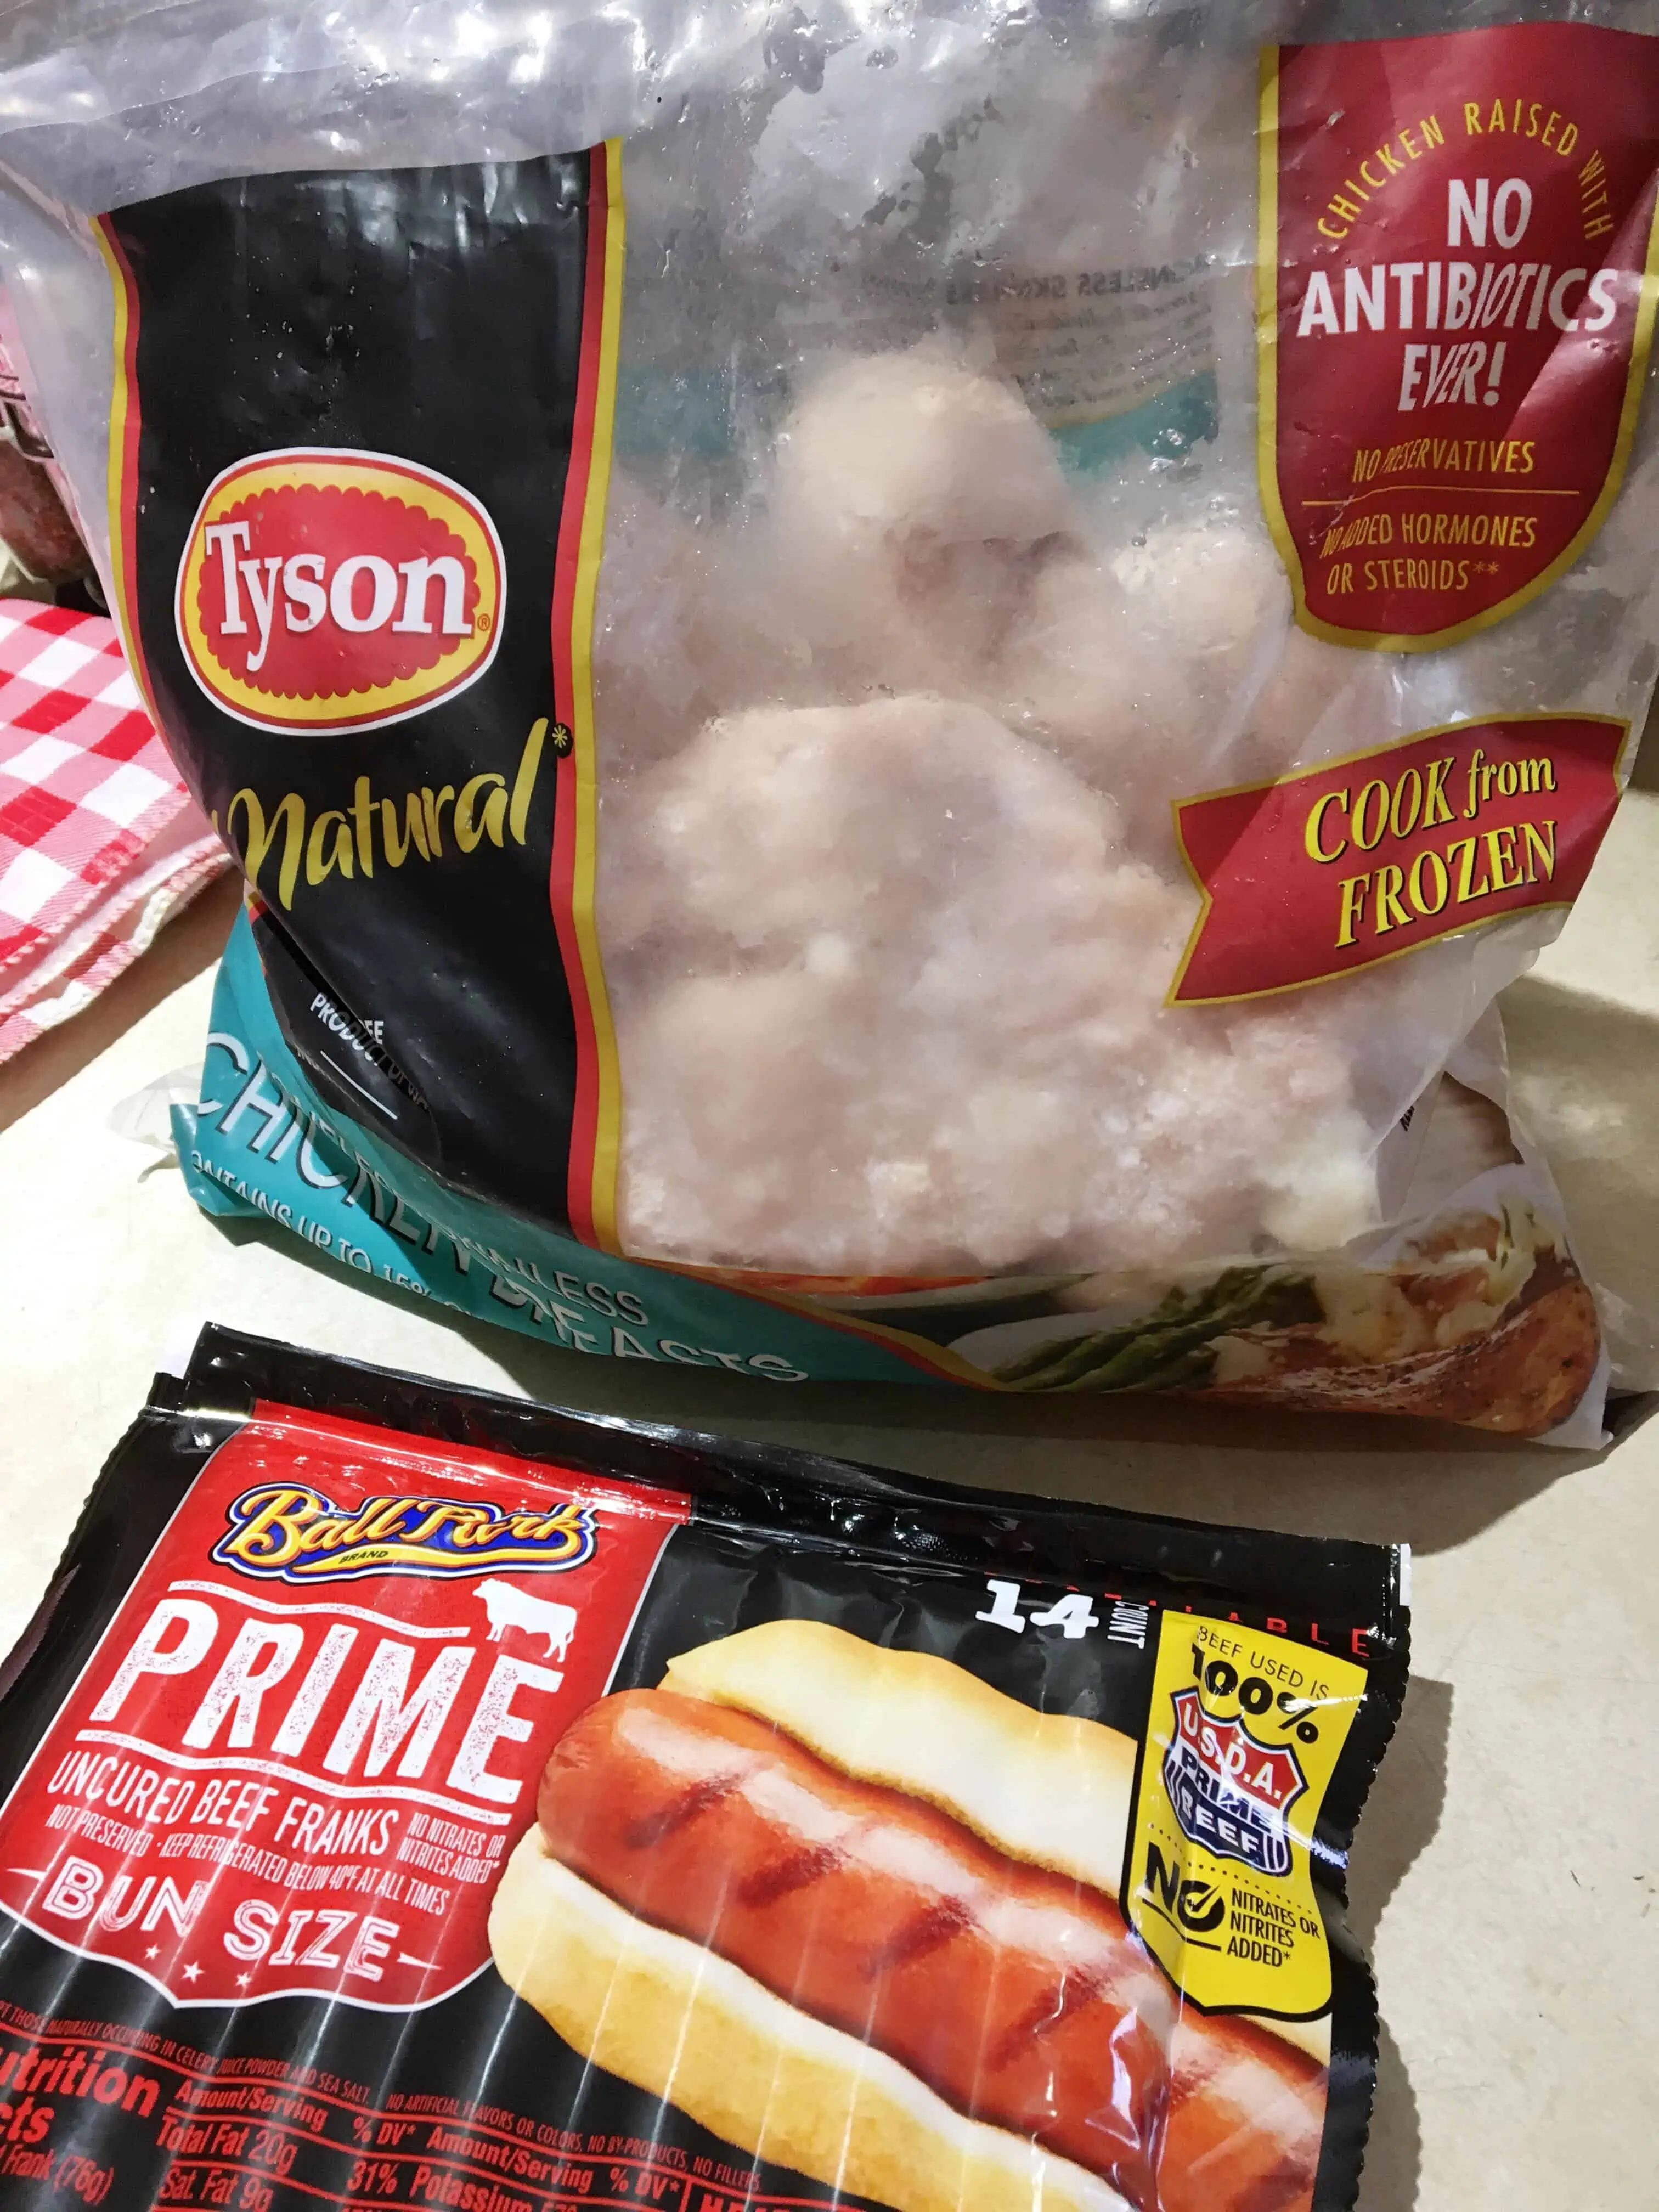 Tyson brand natural chicken and hot dogs for a BBQ meal.